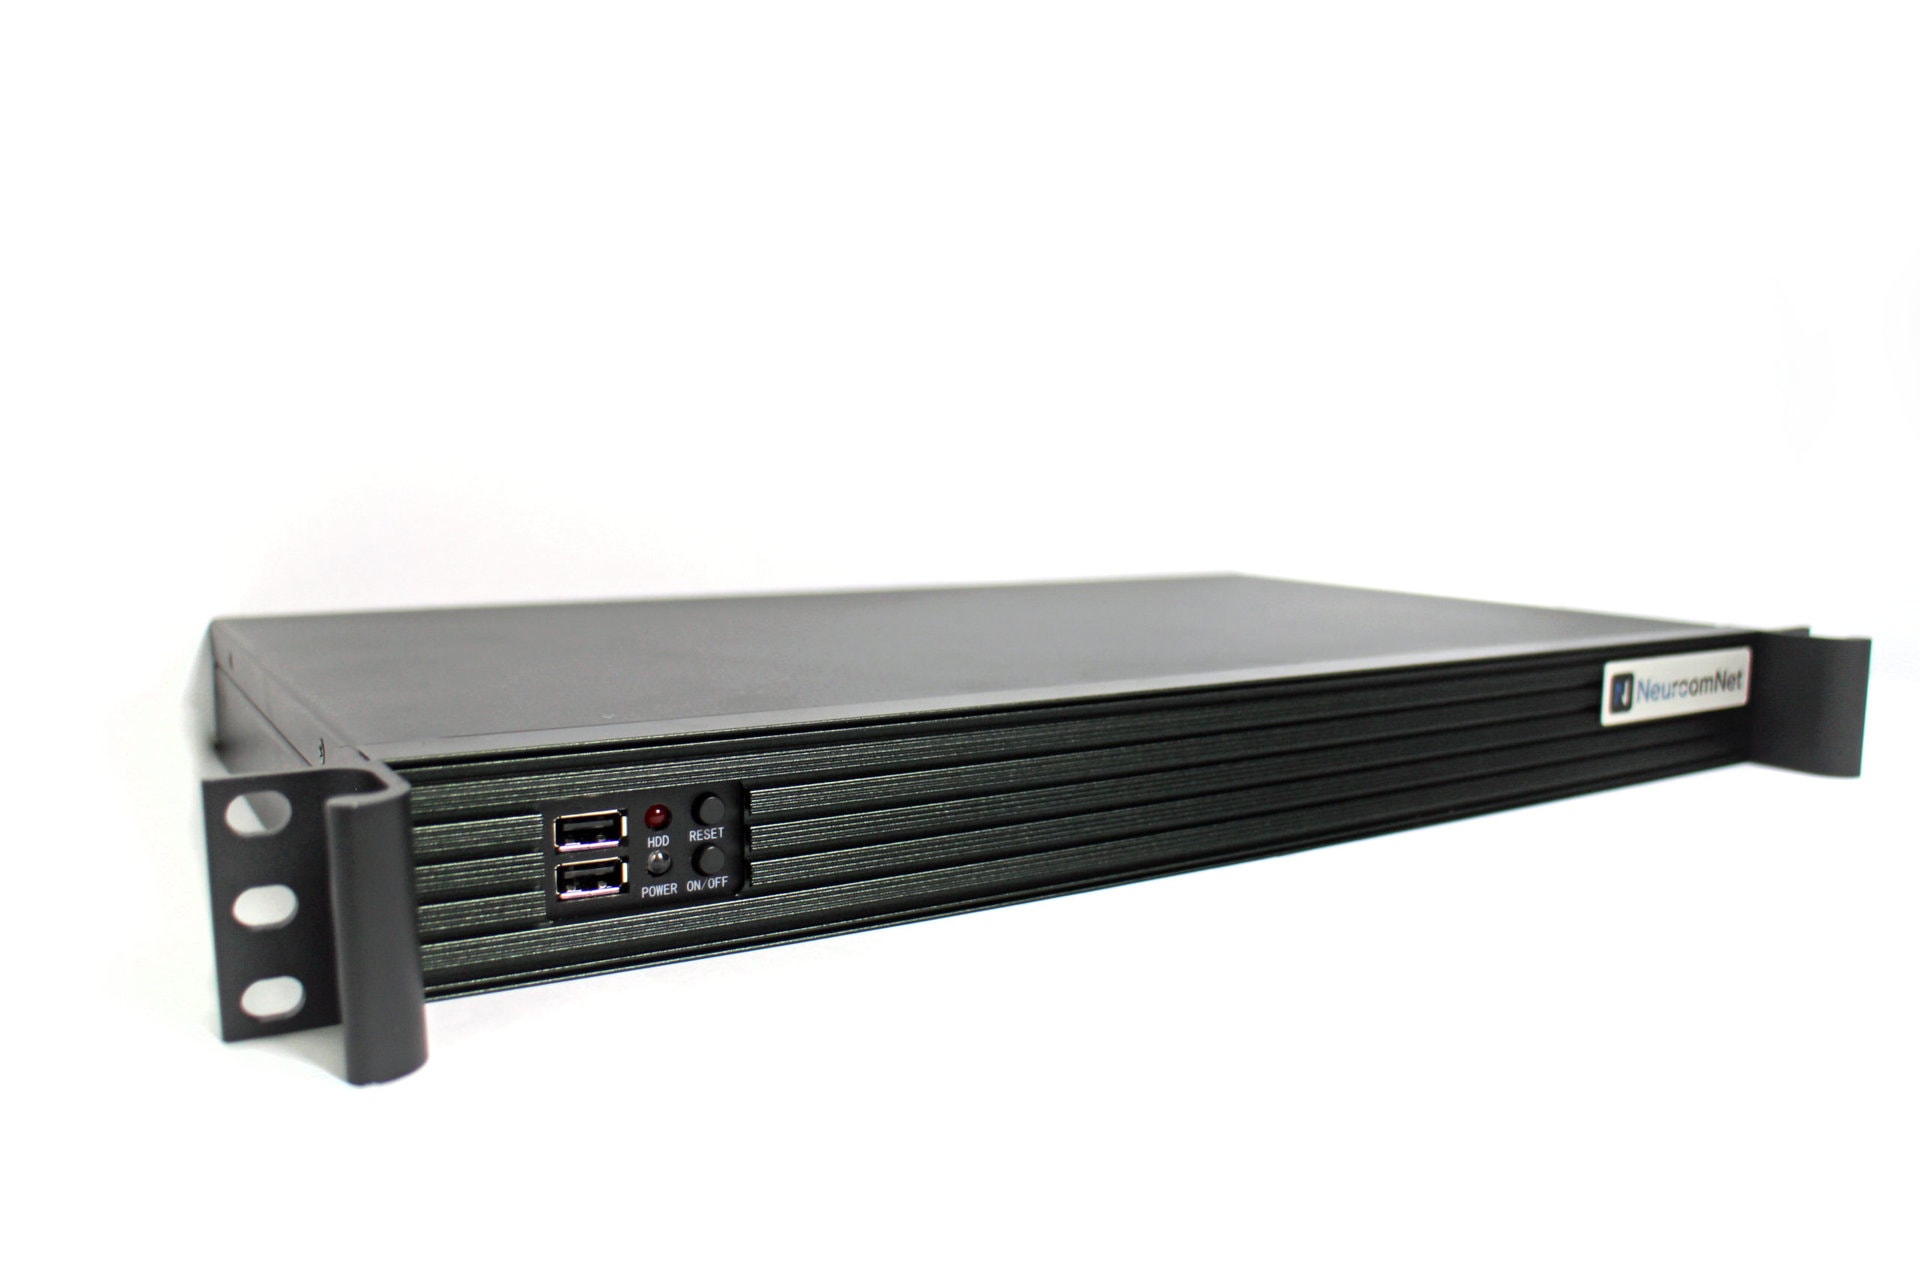 NeuroomNet server chassis 1U, NeuroomNet server PC, 19 inch 1U chassis for rack mounting